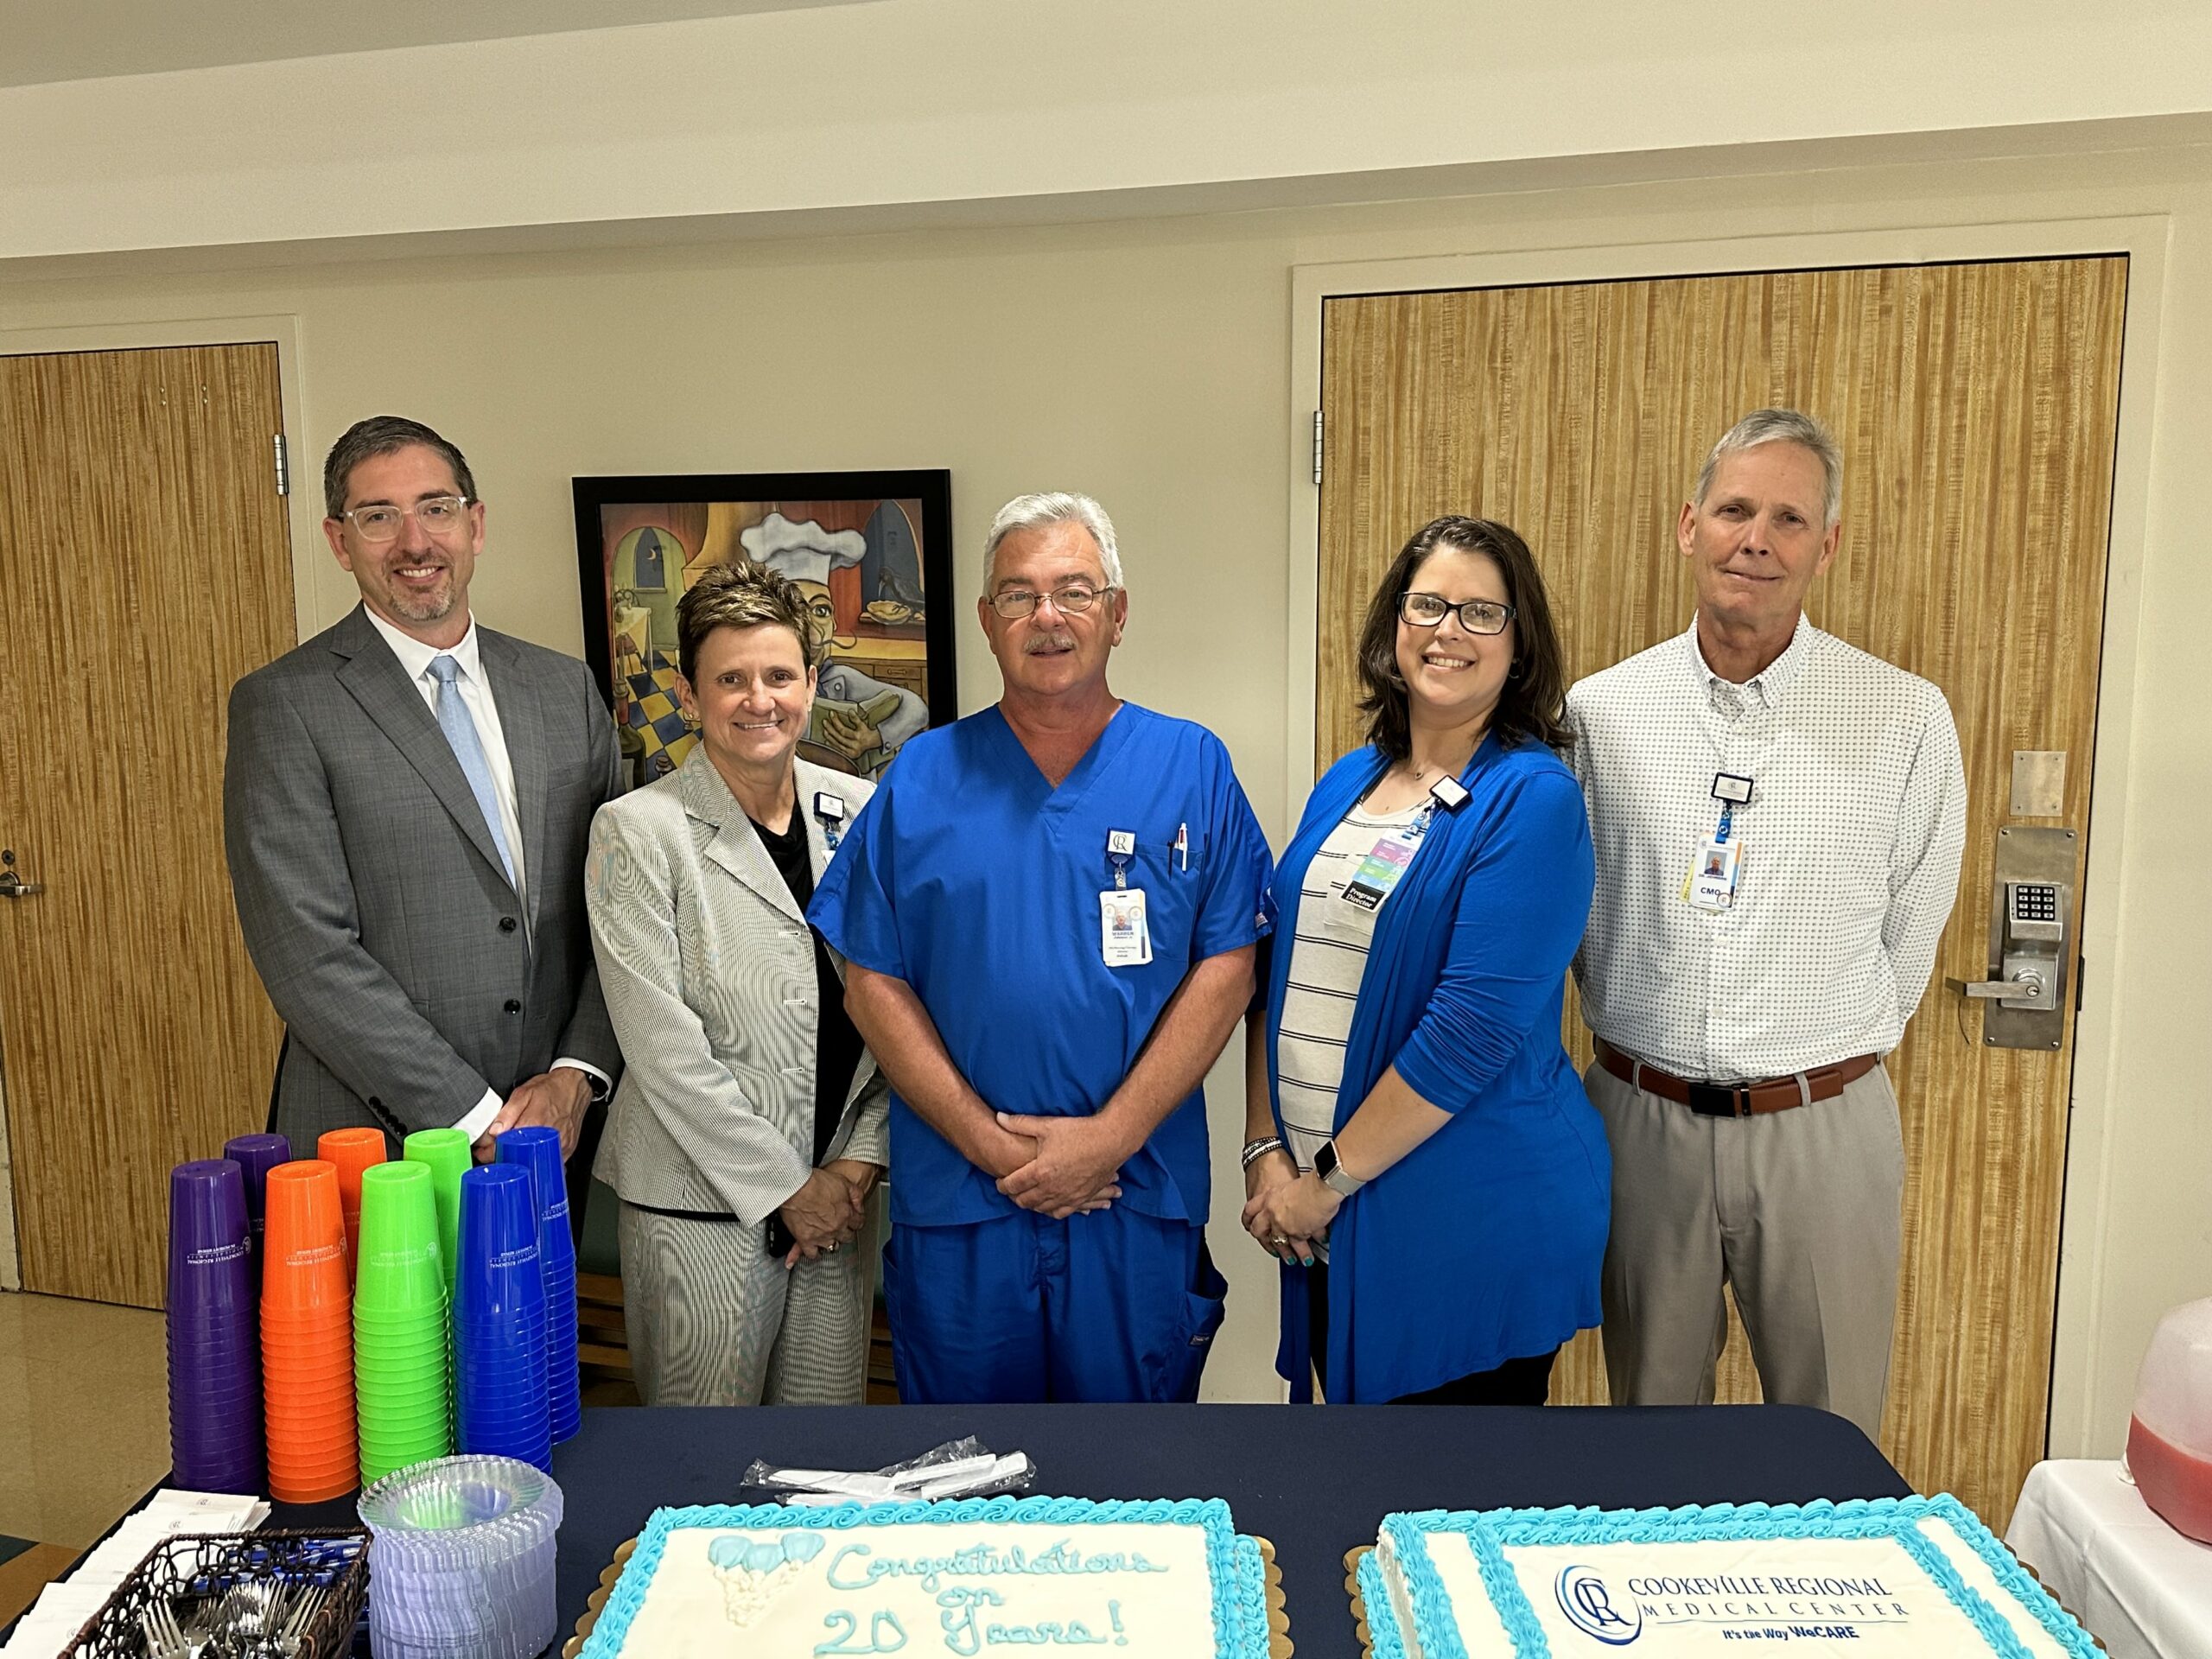 CRMC leadership and Inpatient rehab staff celebrates 20 years of serving patients